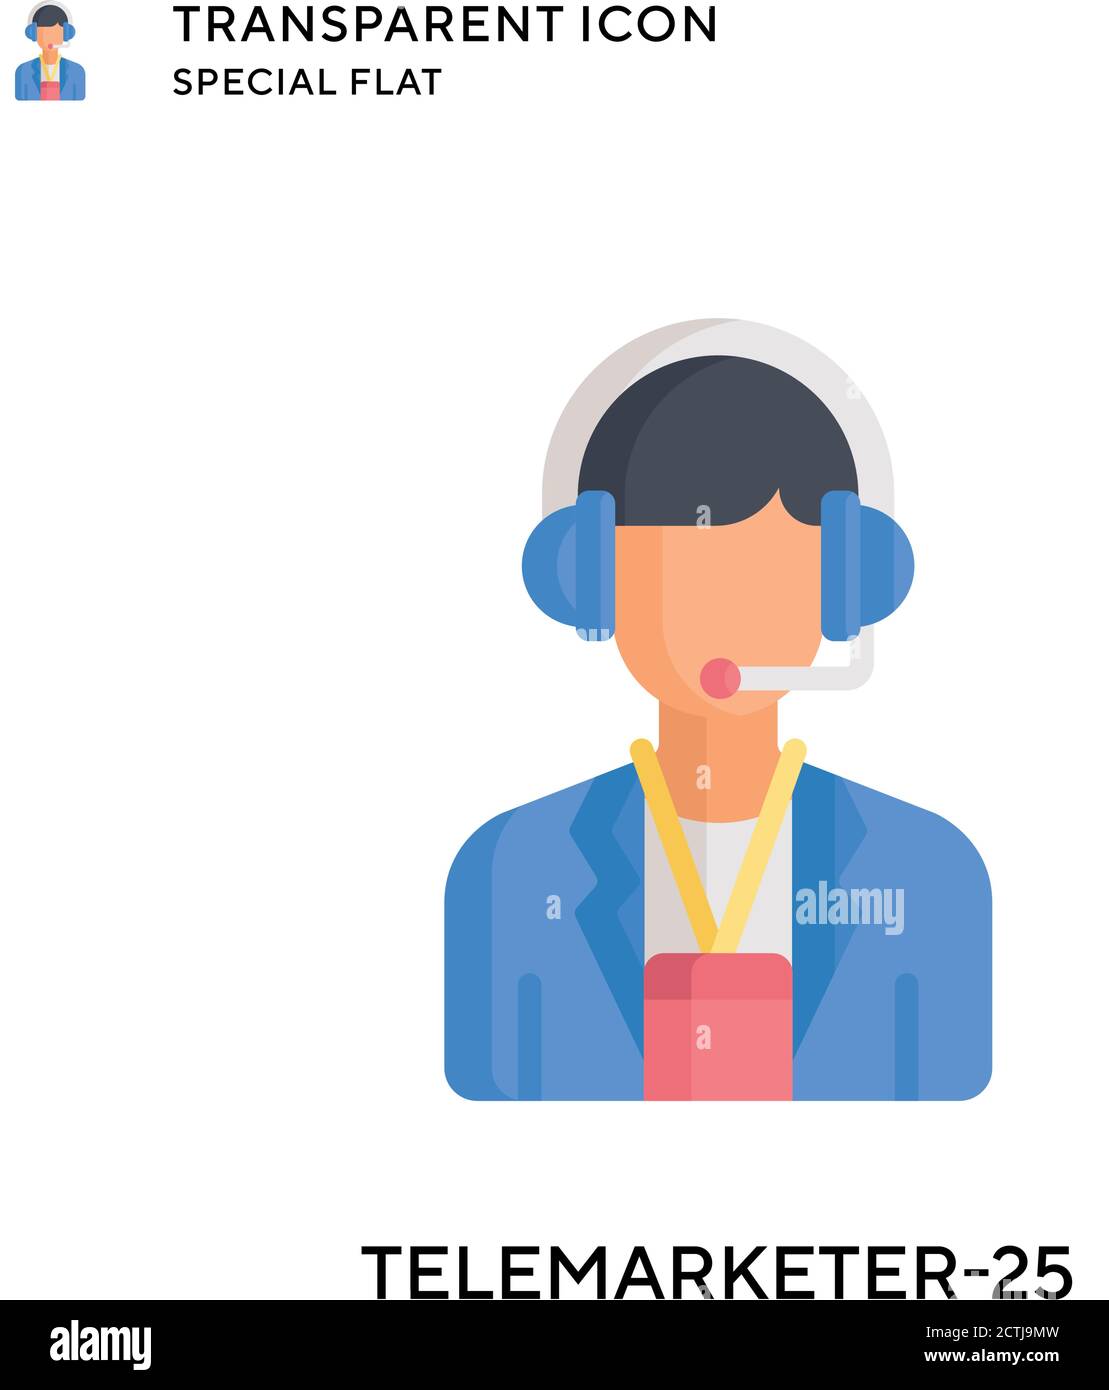 Telemarketer-25 vector icon. Flat style illustration. EPS 10 vector. Stock Vector